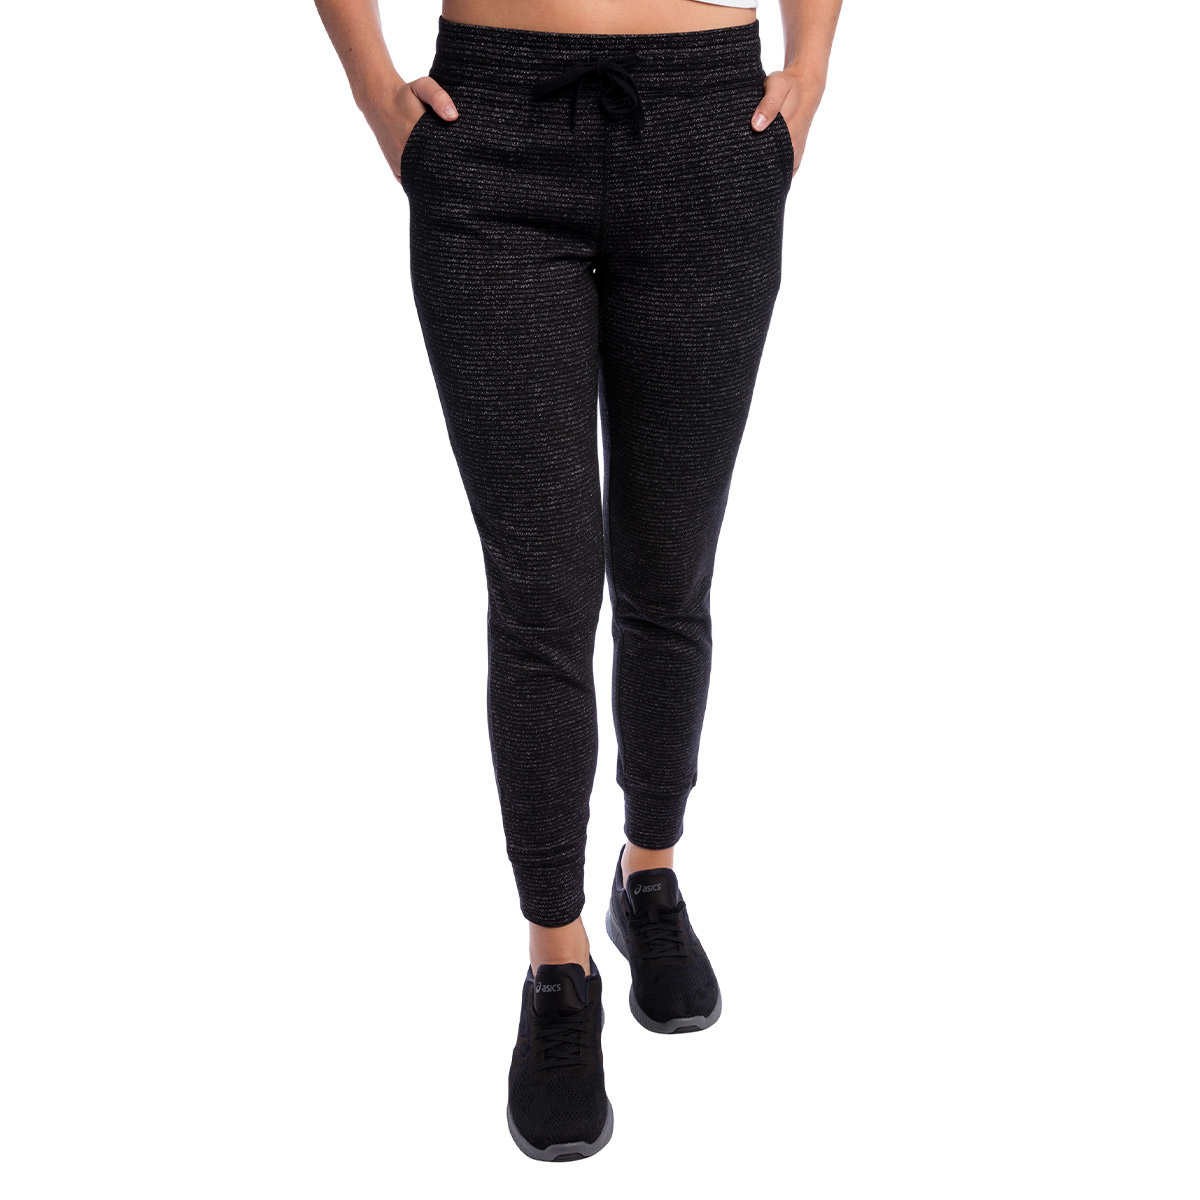 Champion Women's French Terry Pocket Pant, Black/Small